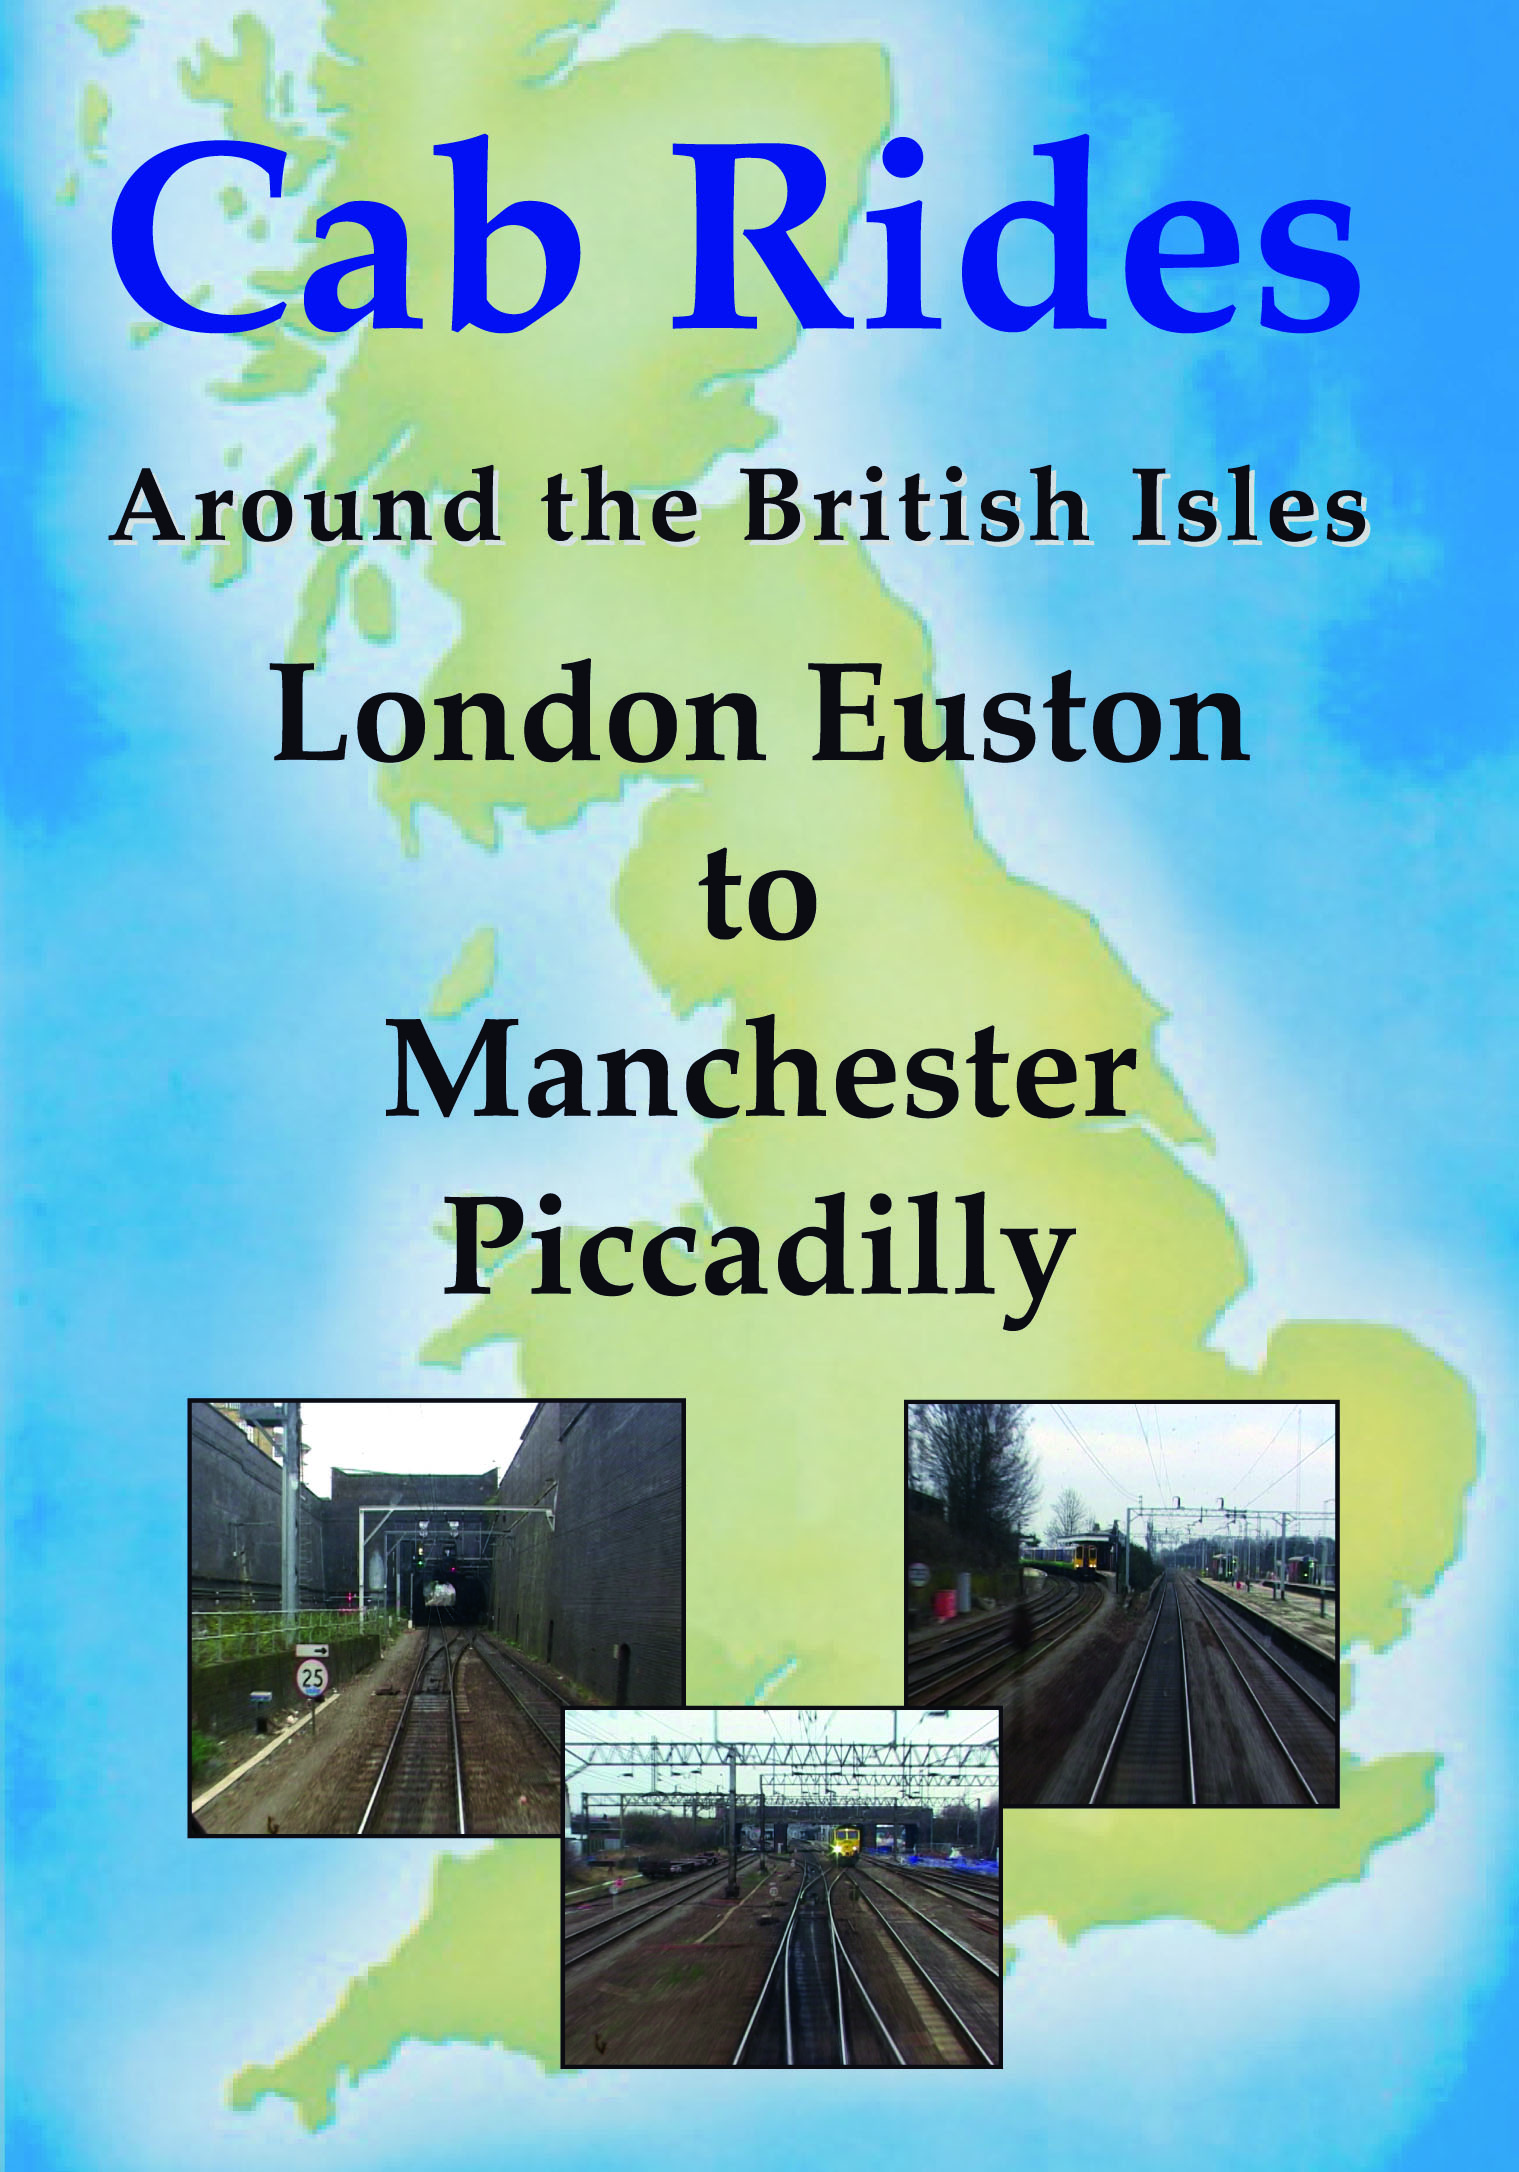 Cab Rides Around the British Isles: London Euston to Manchester Piccadilly via Stoke-on-Trent in 2003